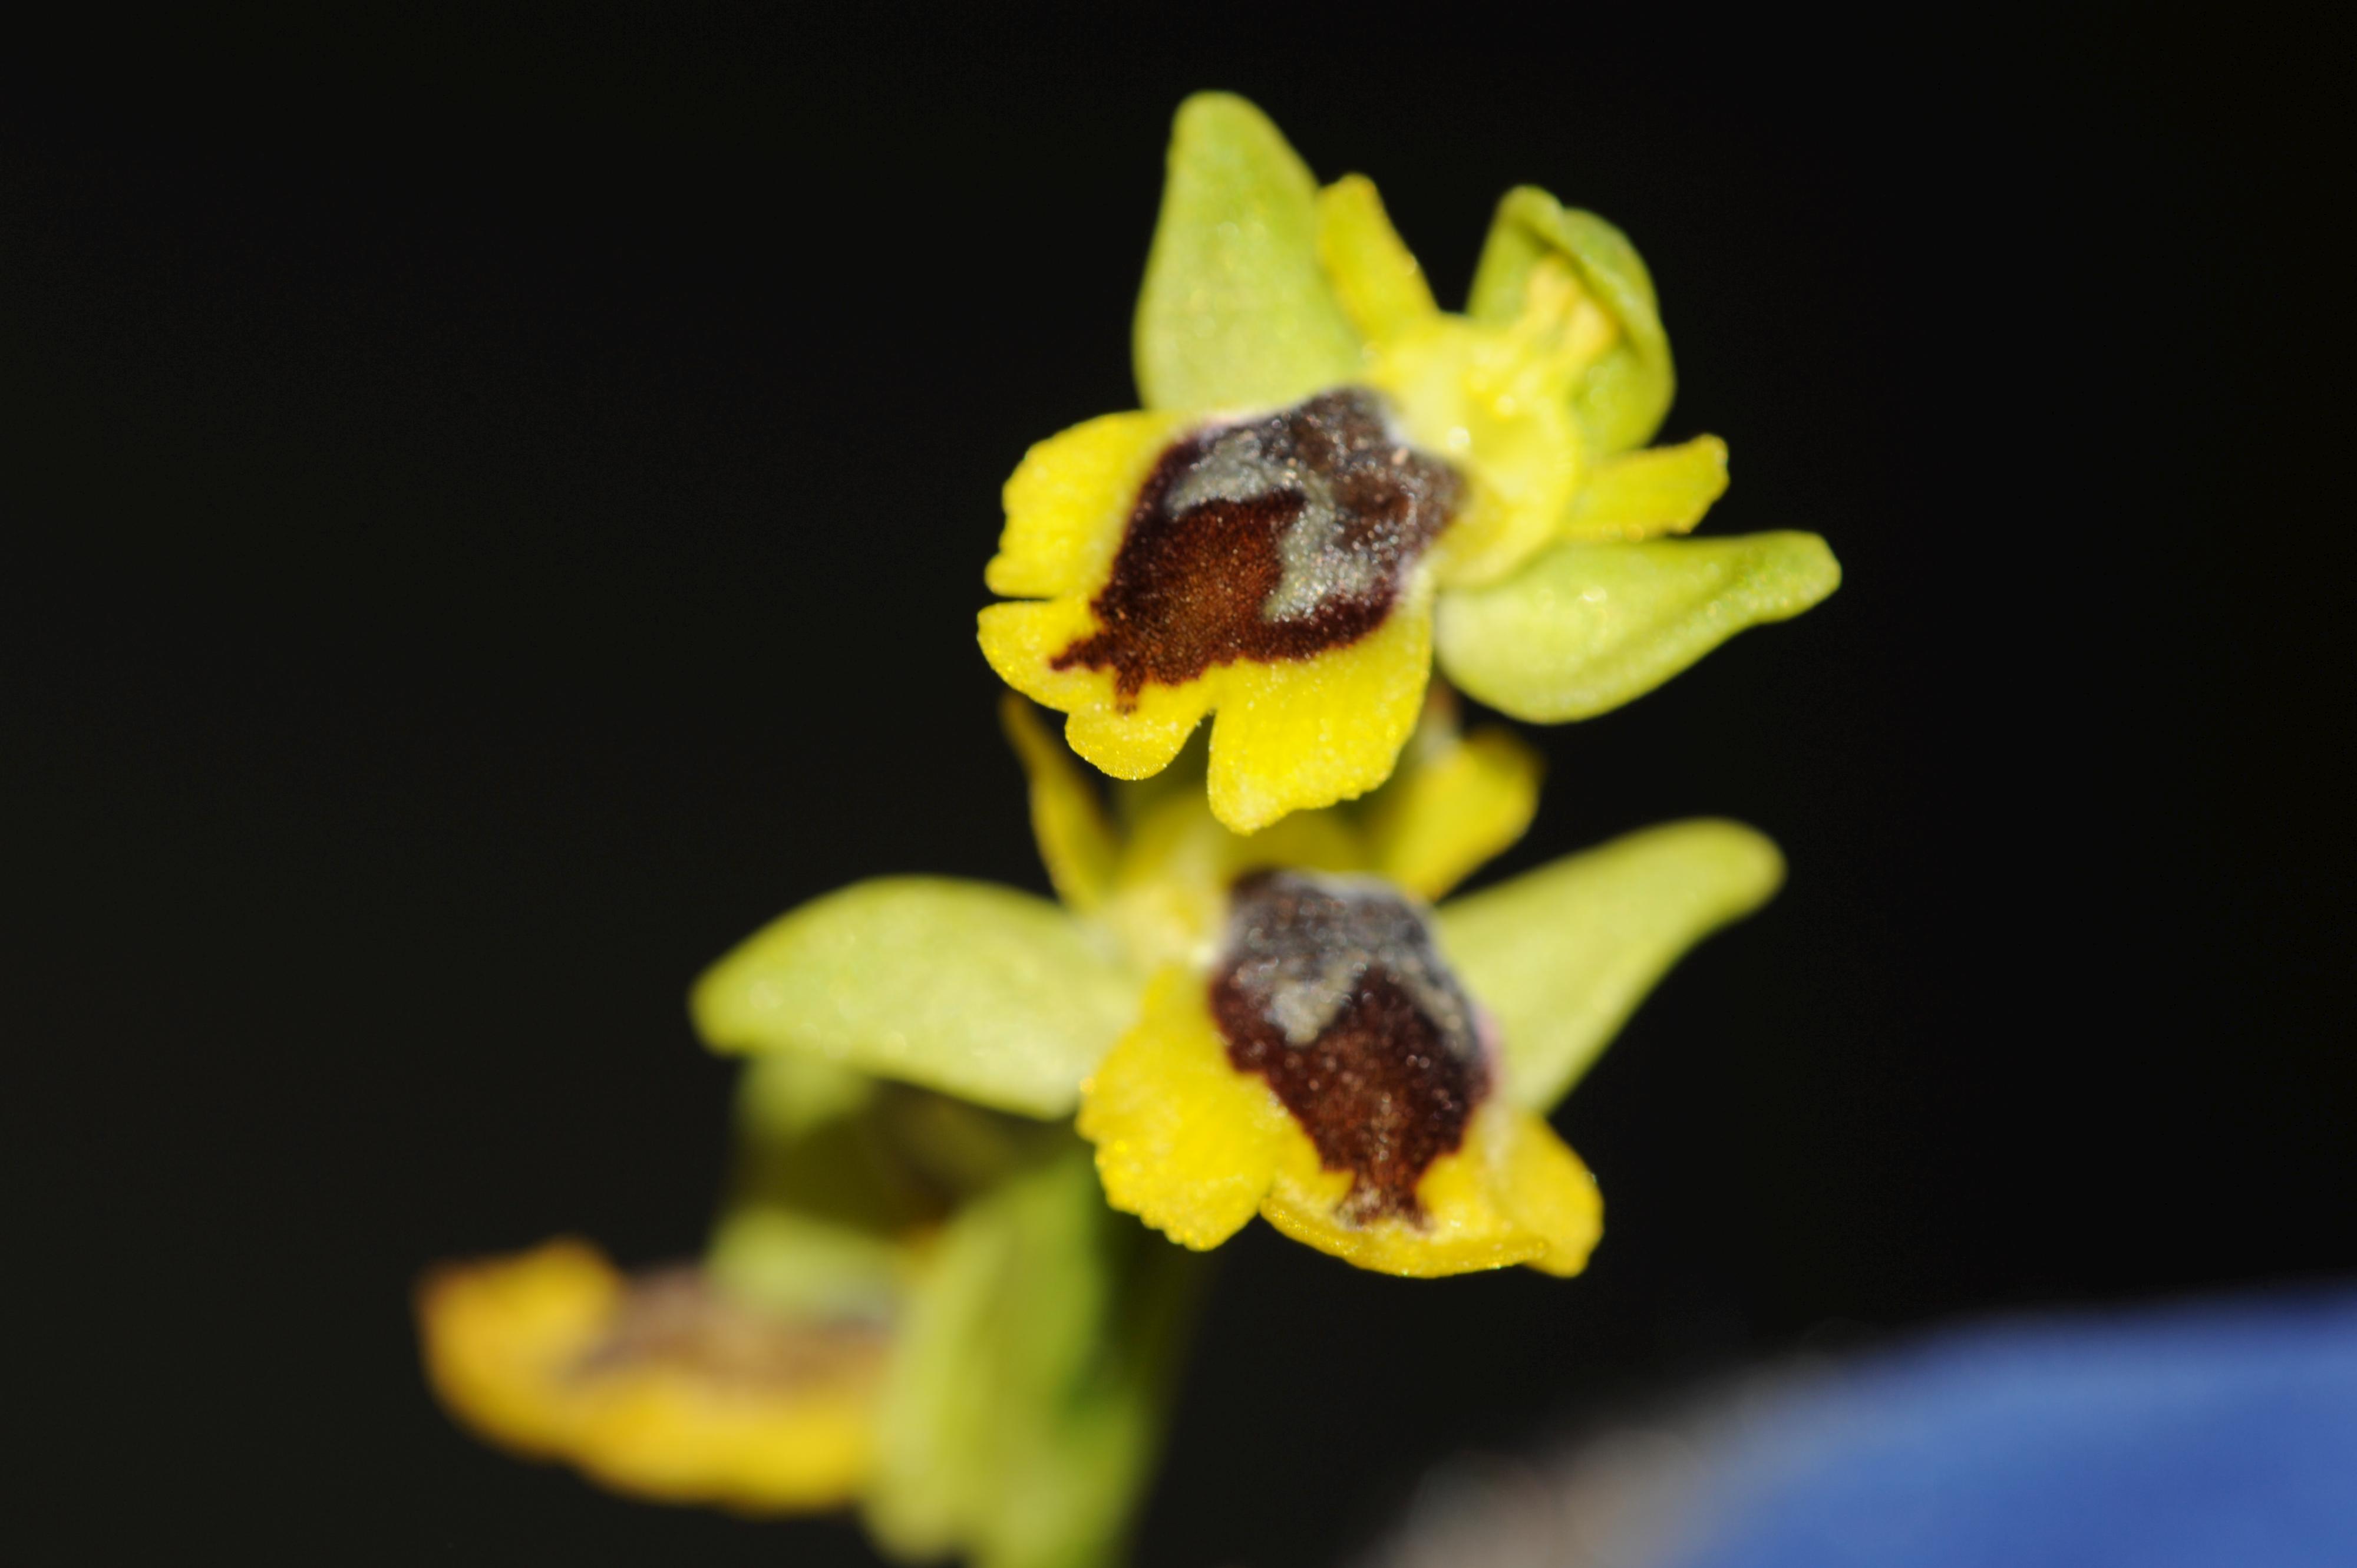 /wp-content/uploads/2020/10/Ophrys%20sicula-2.jpg